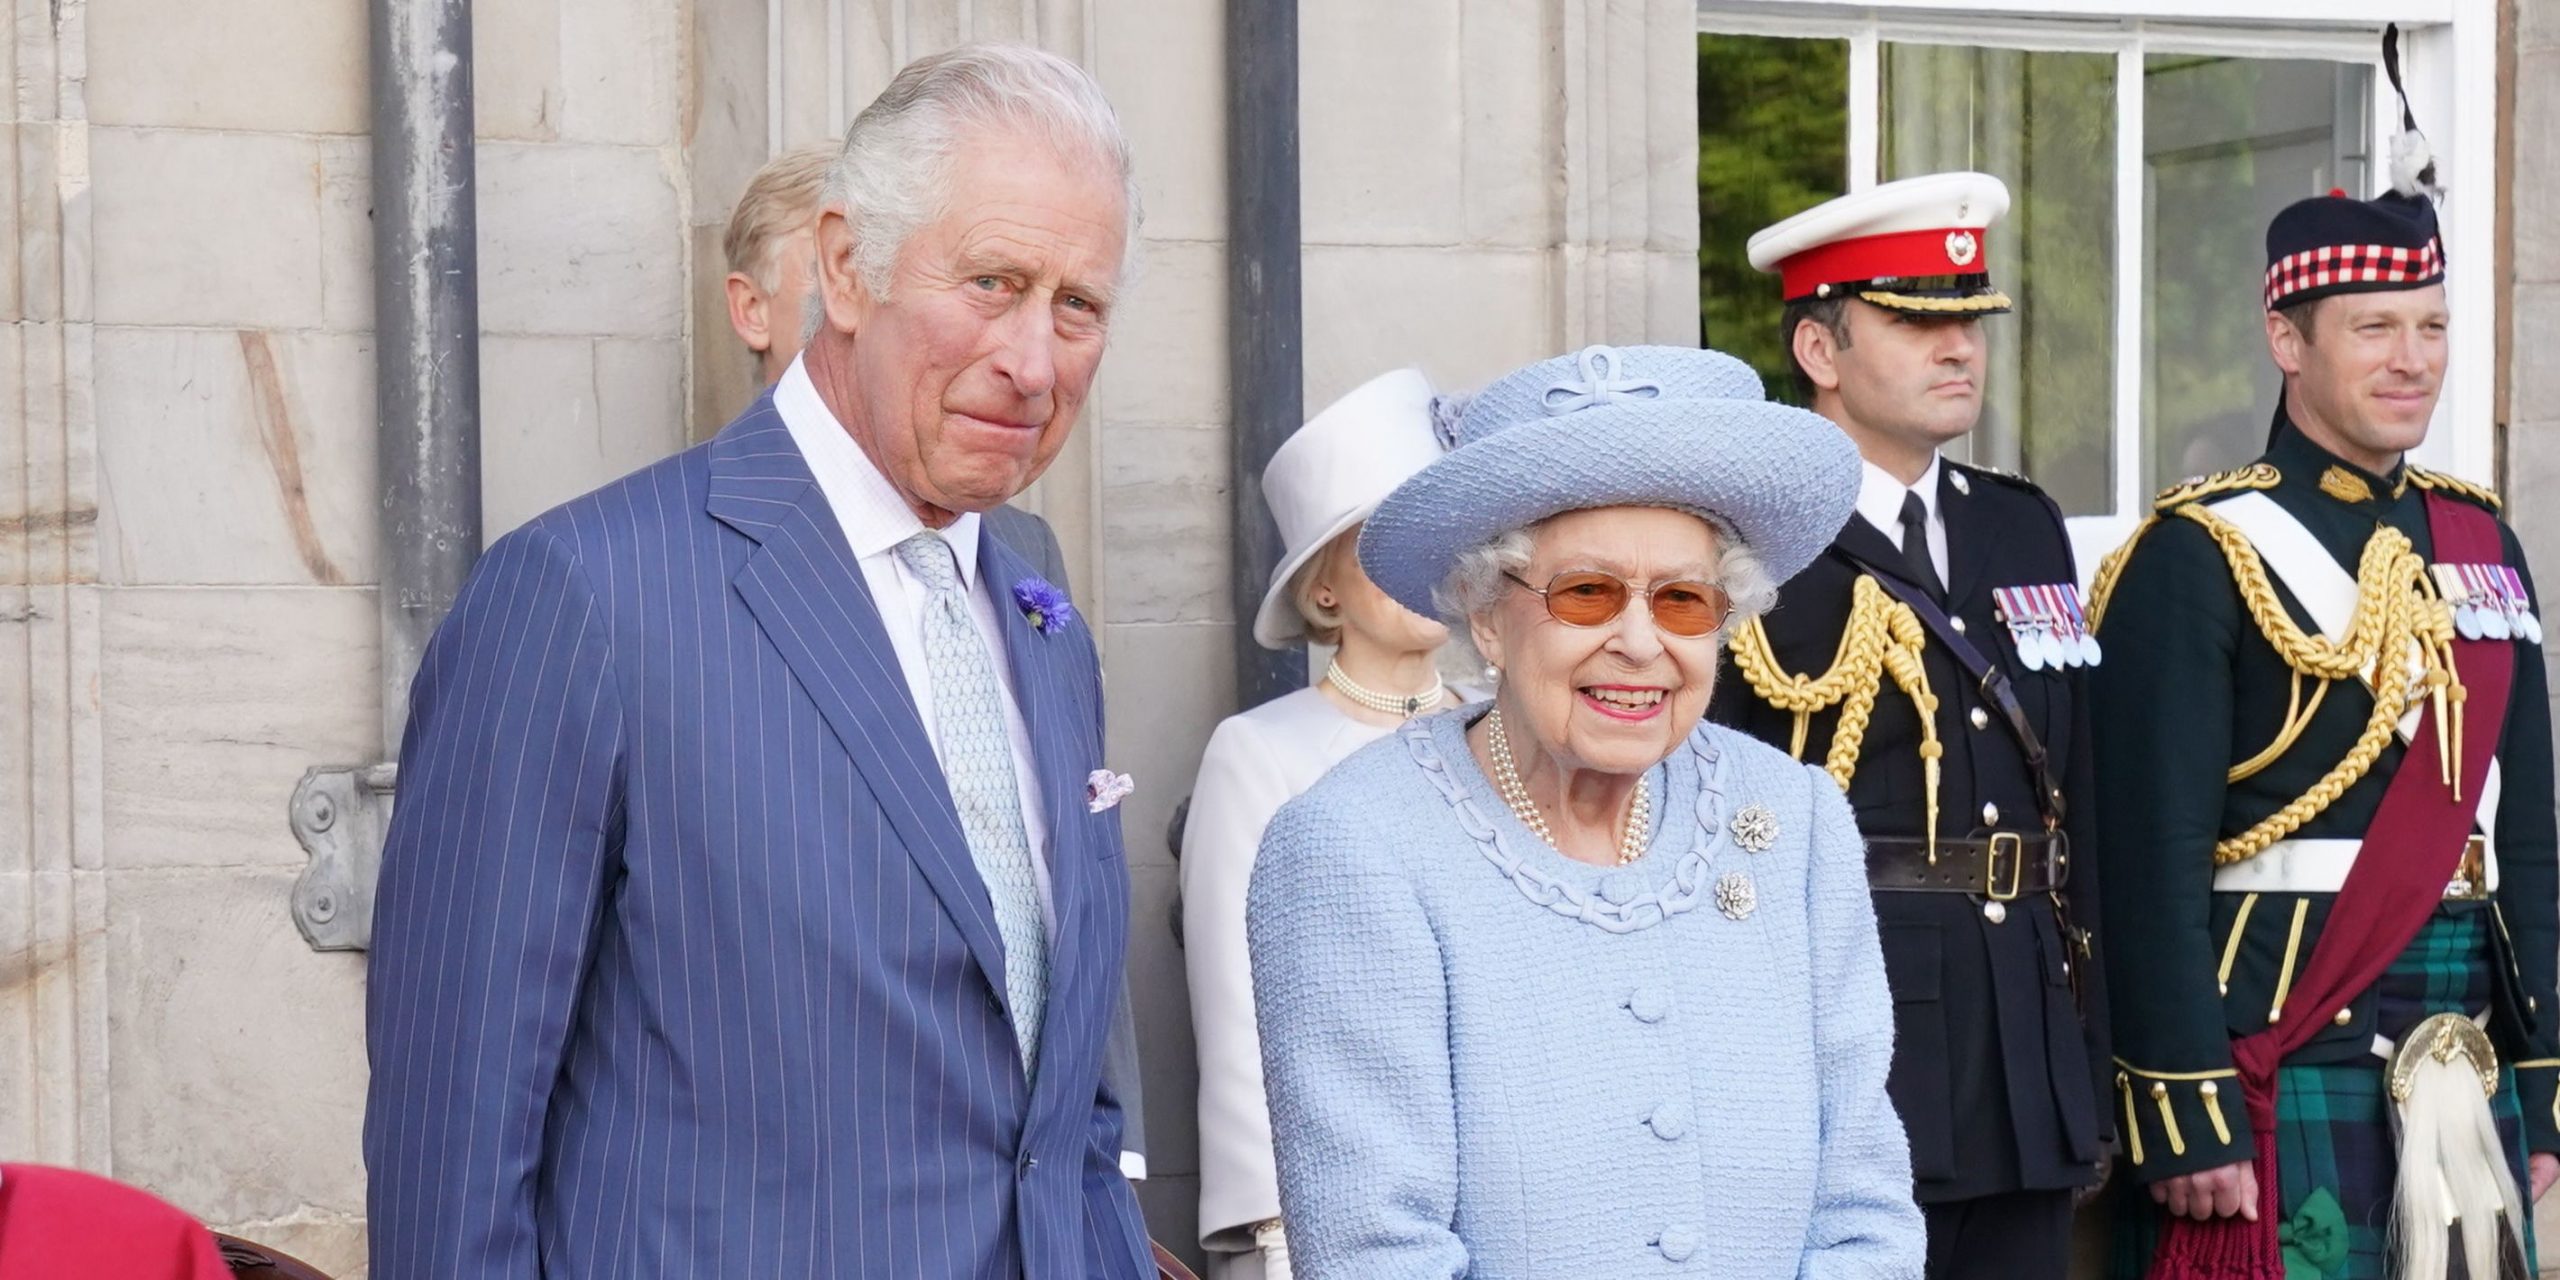 Prince Charles Reportedly Had ‘Emotional’ First Meeting With Granddaughter Lilibet